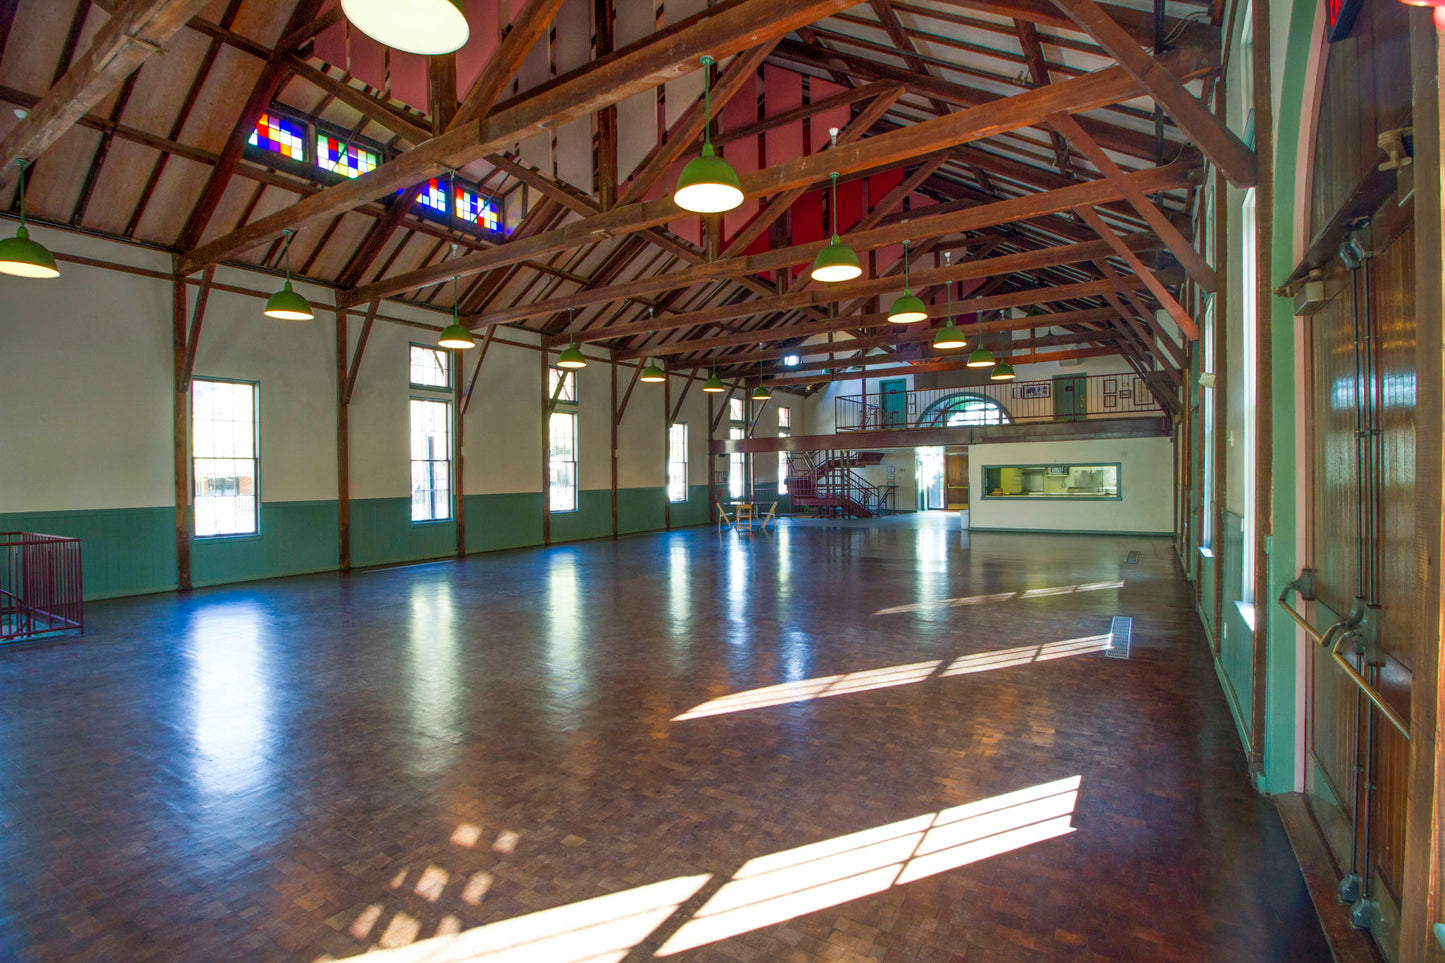 Tuesday Contra Dance at The Trolley Barn